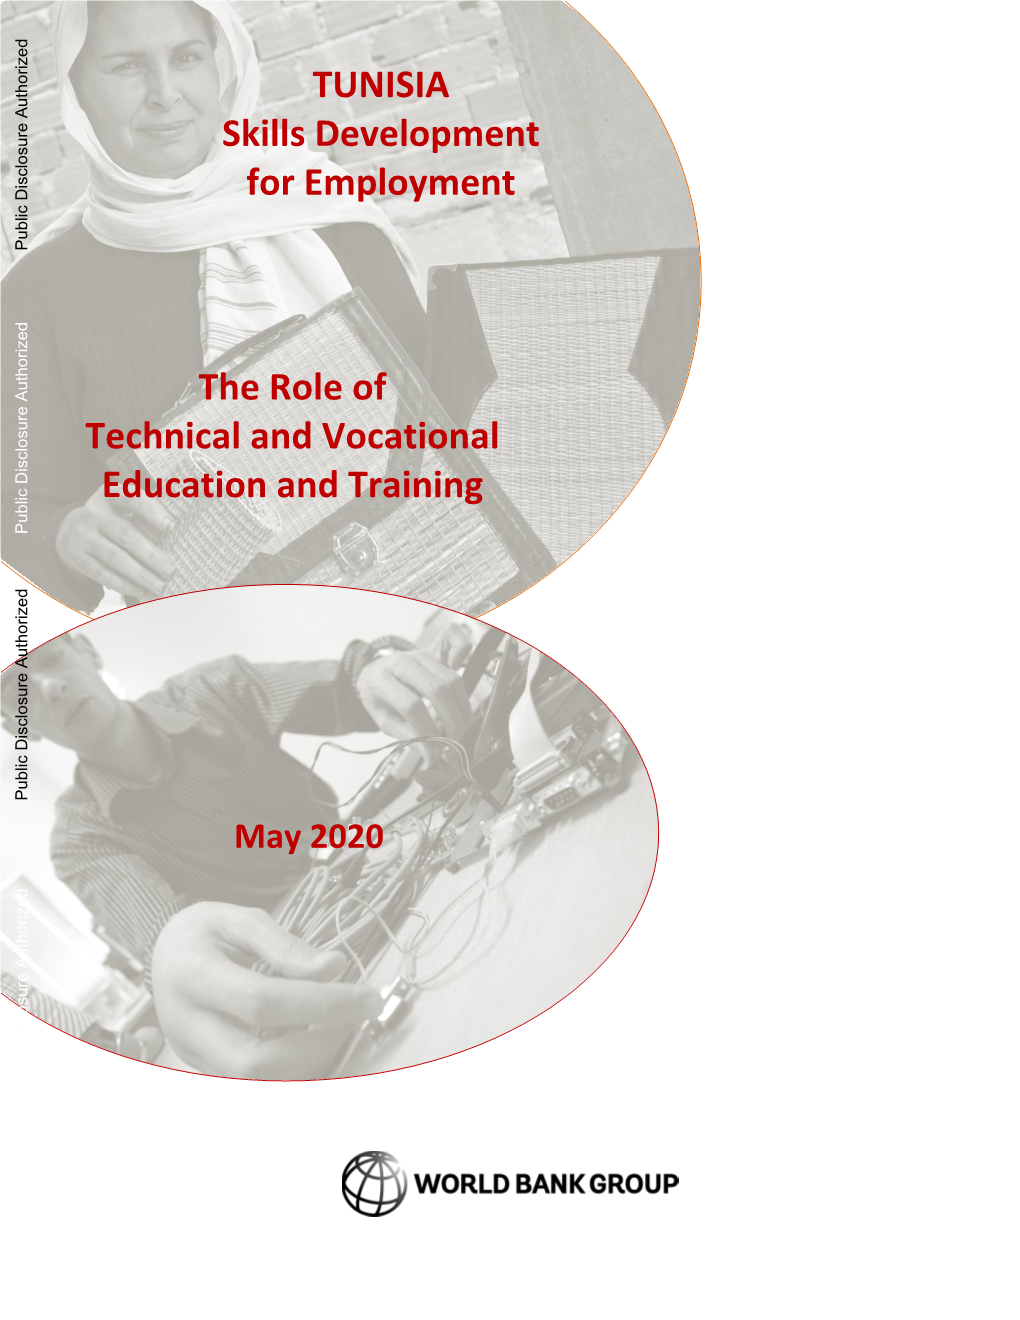 The Role of Technical and Vocational Education and Training TUNISIA